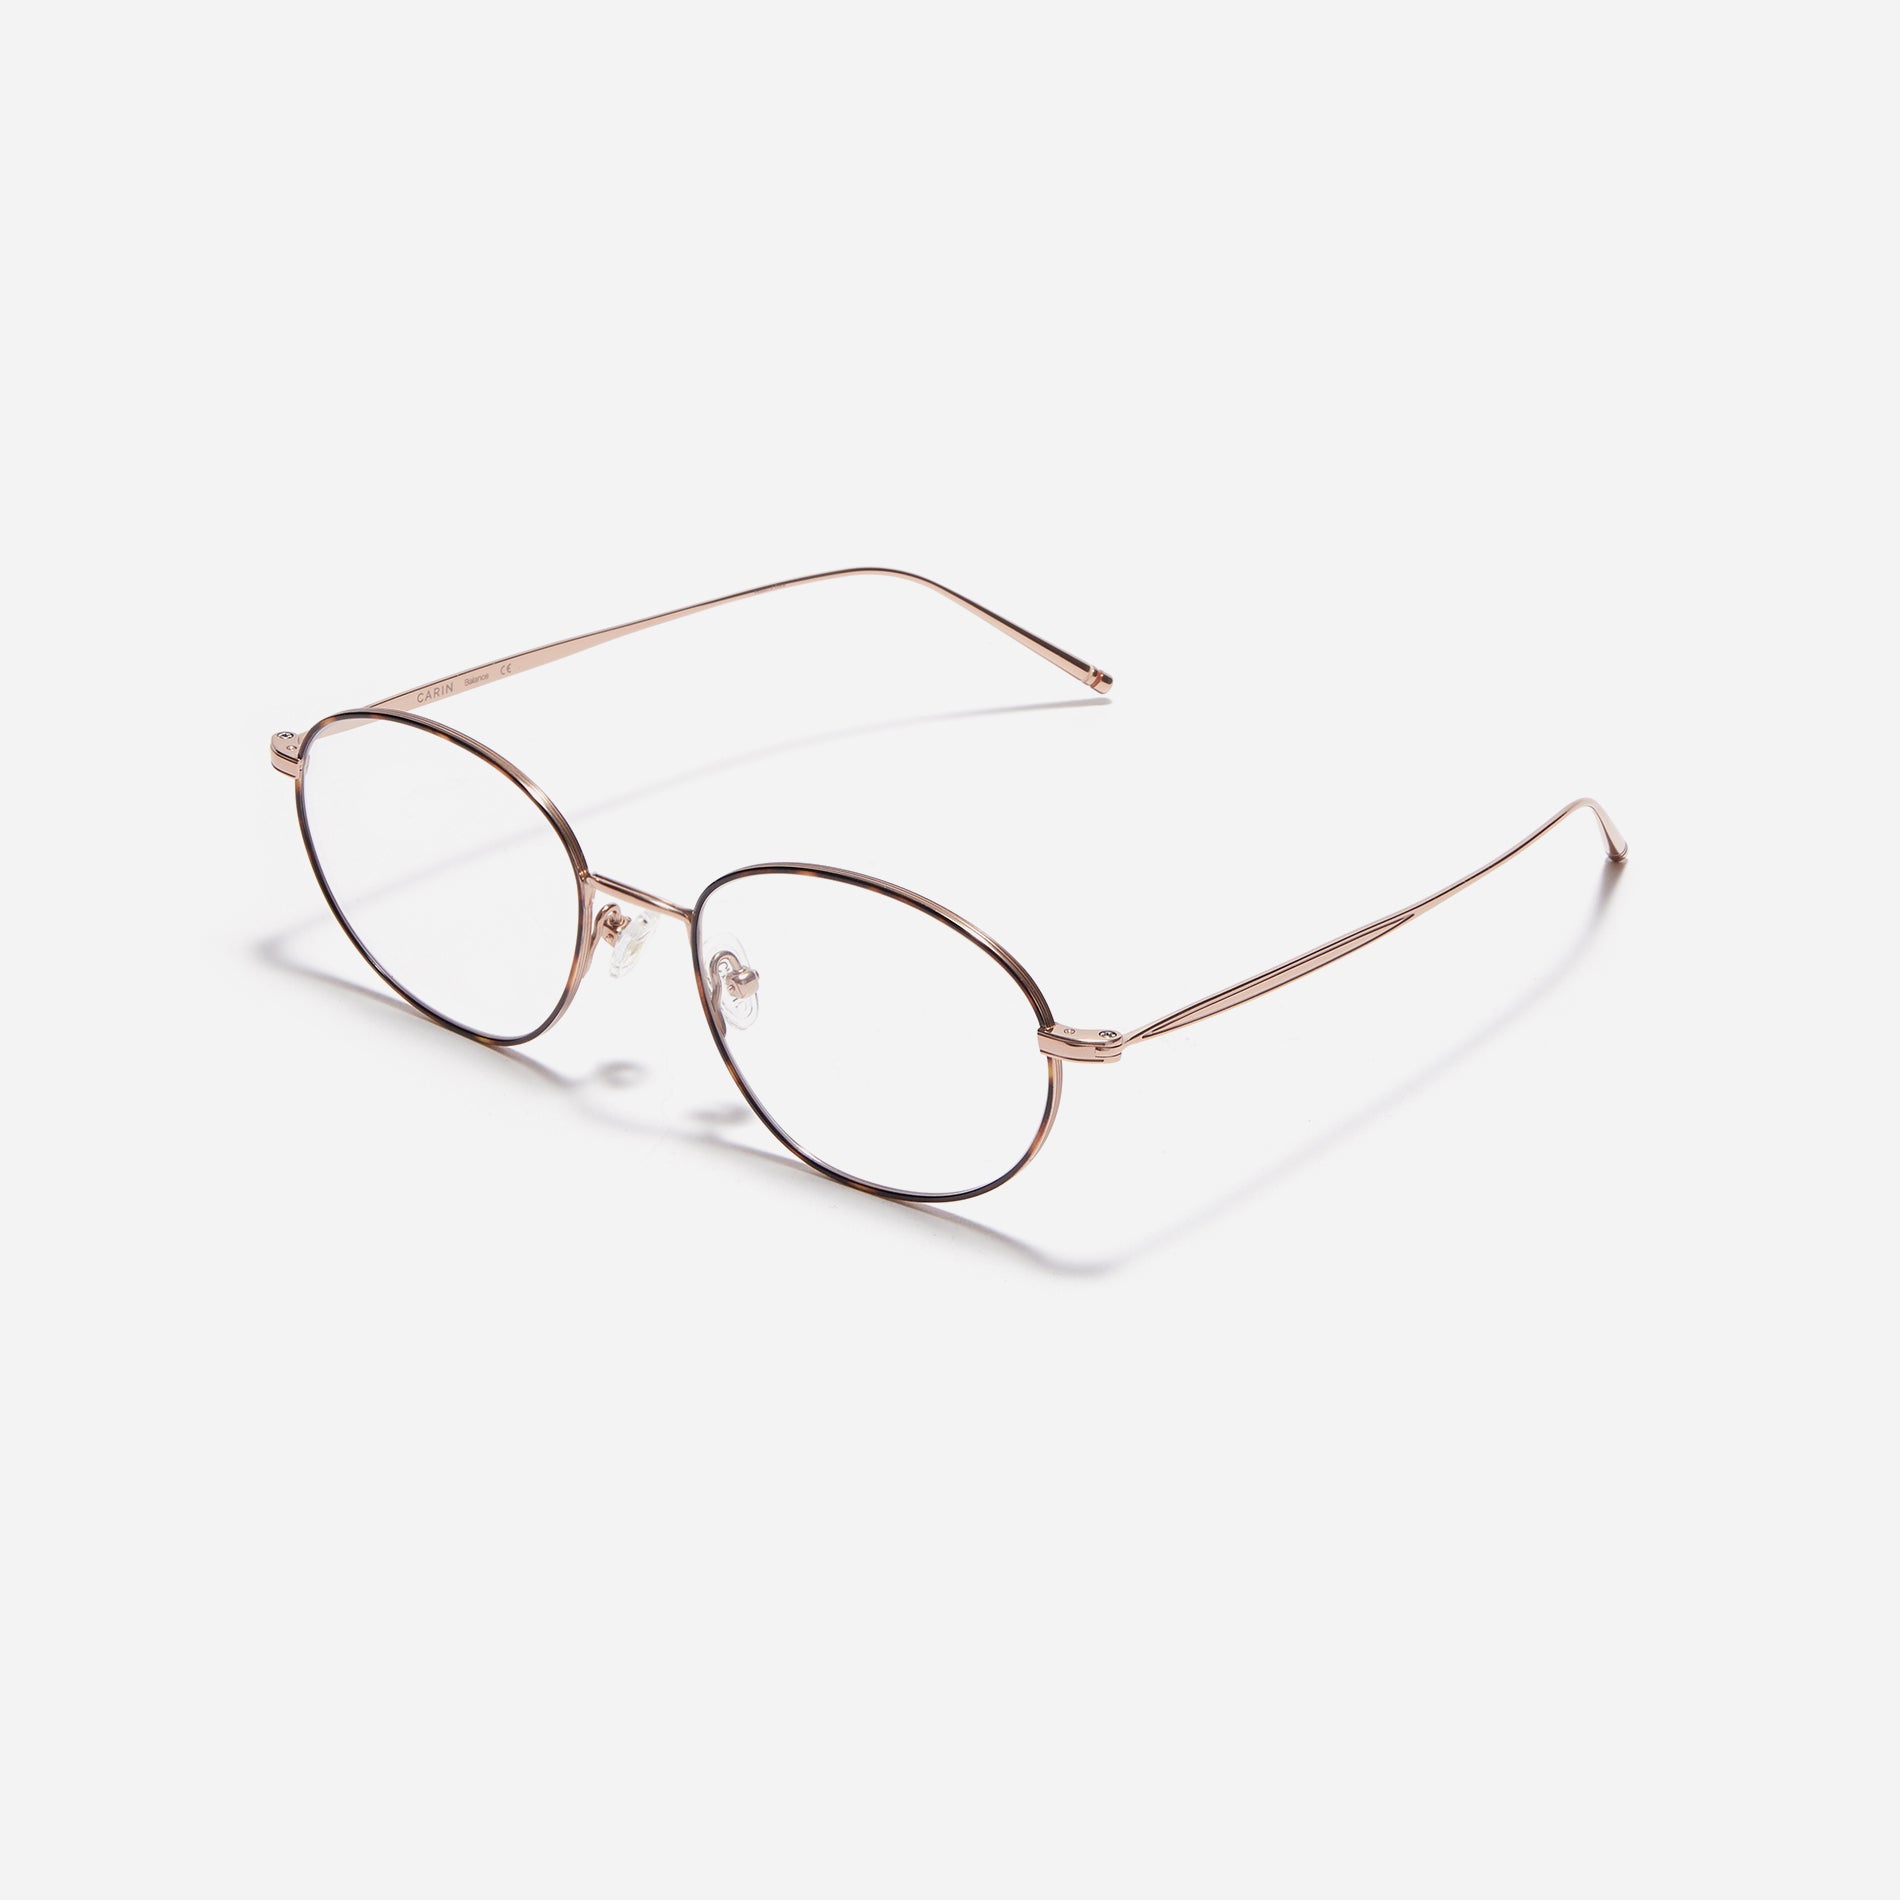  Stylish oval-shaped eyeglasses with slender rims. Crafted entirely from titanium, they guarantee a lighter and more comfortable fit. With a variety of colors available, Edell offers a fashionable style for both men and women.